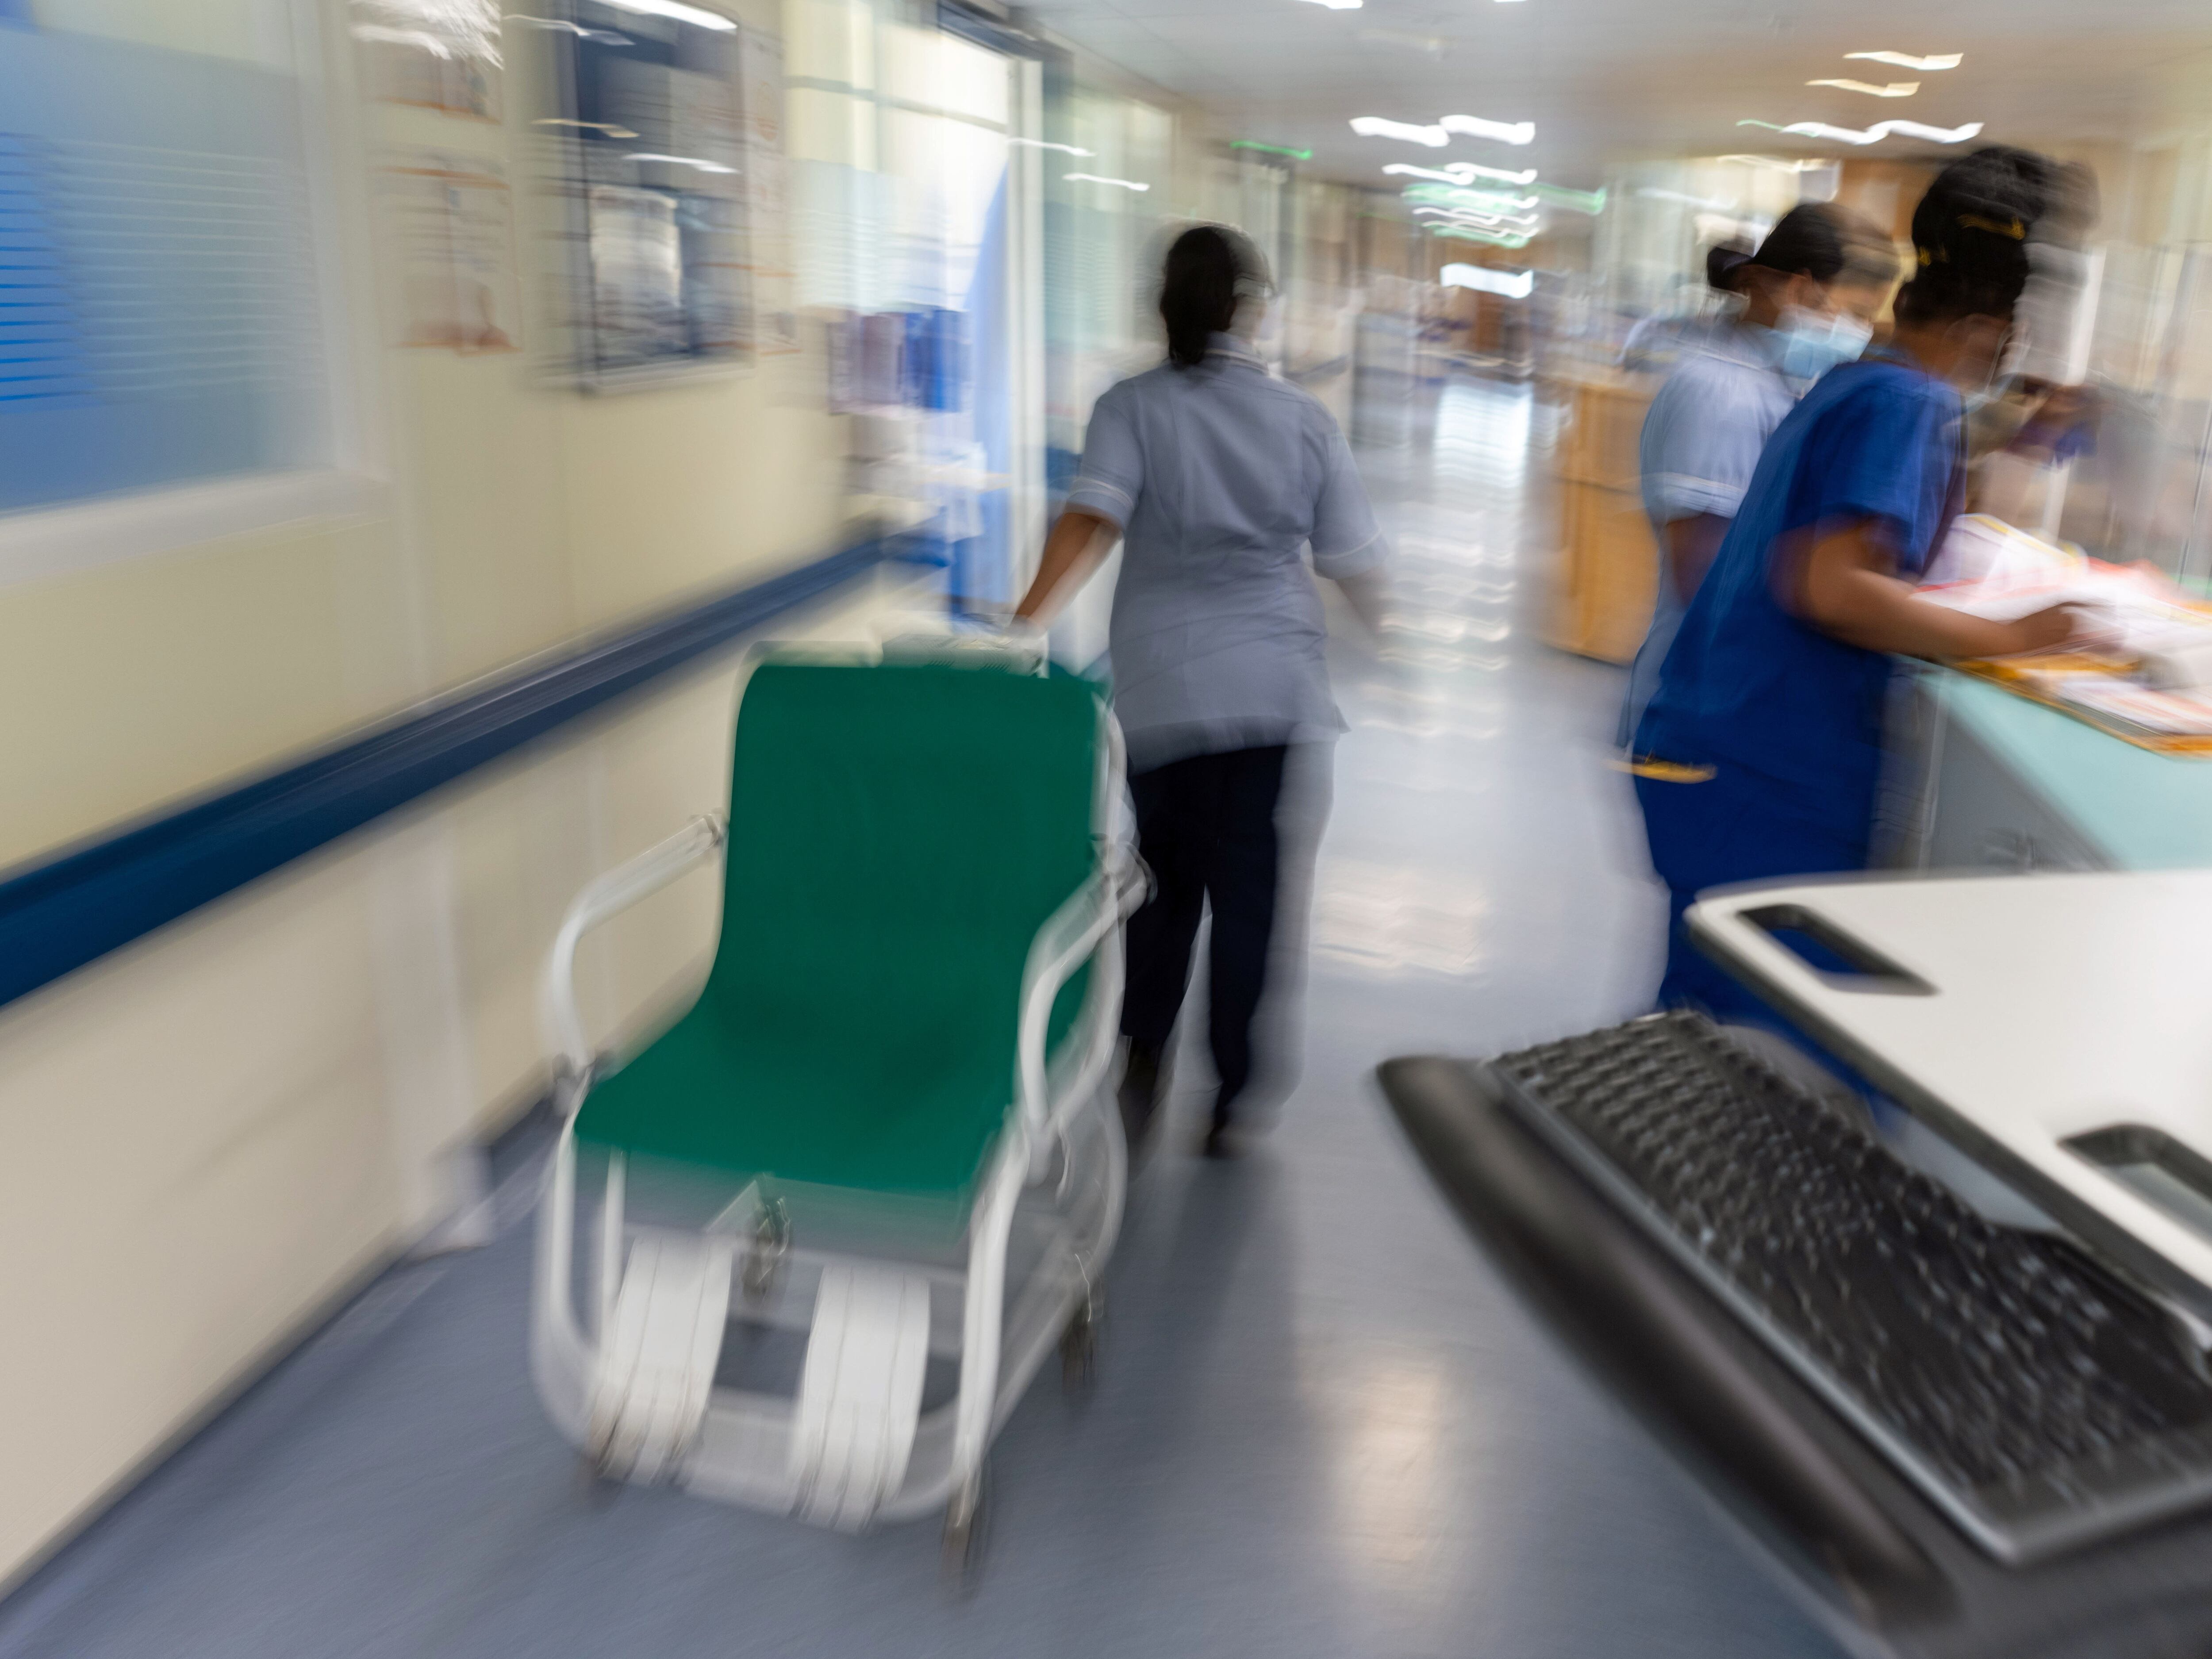 ‘Long waits remain endemic in the NHS’ – report